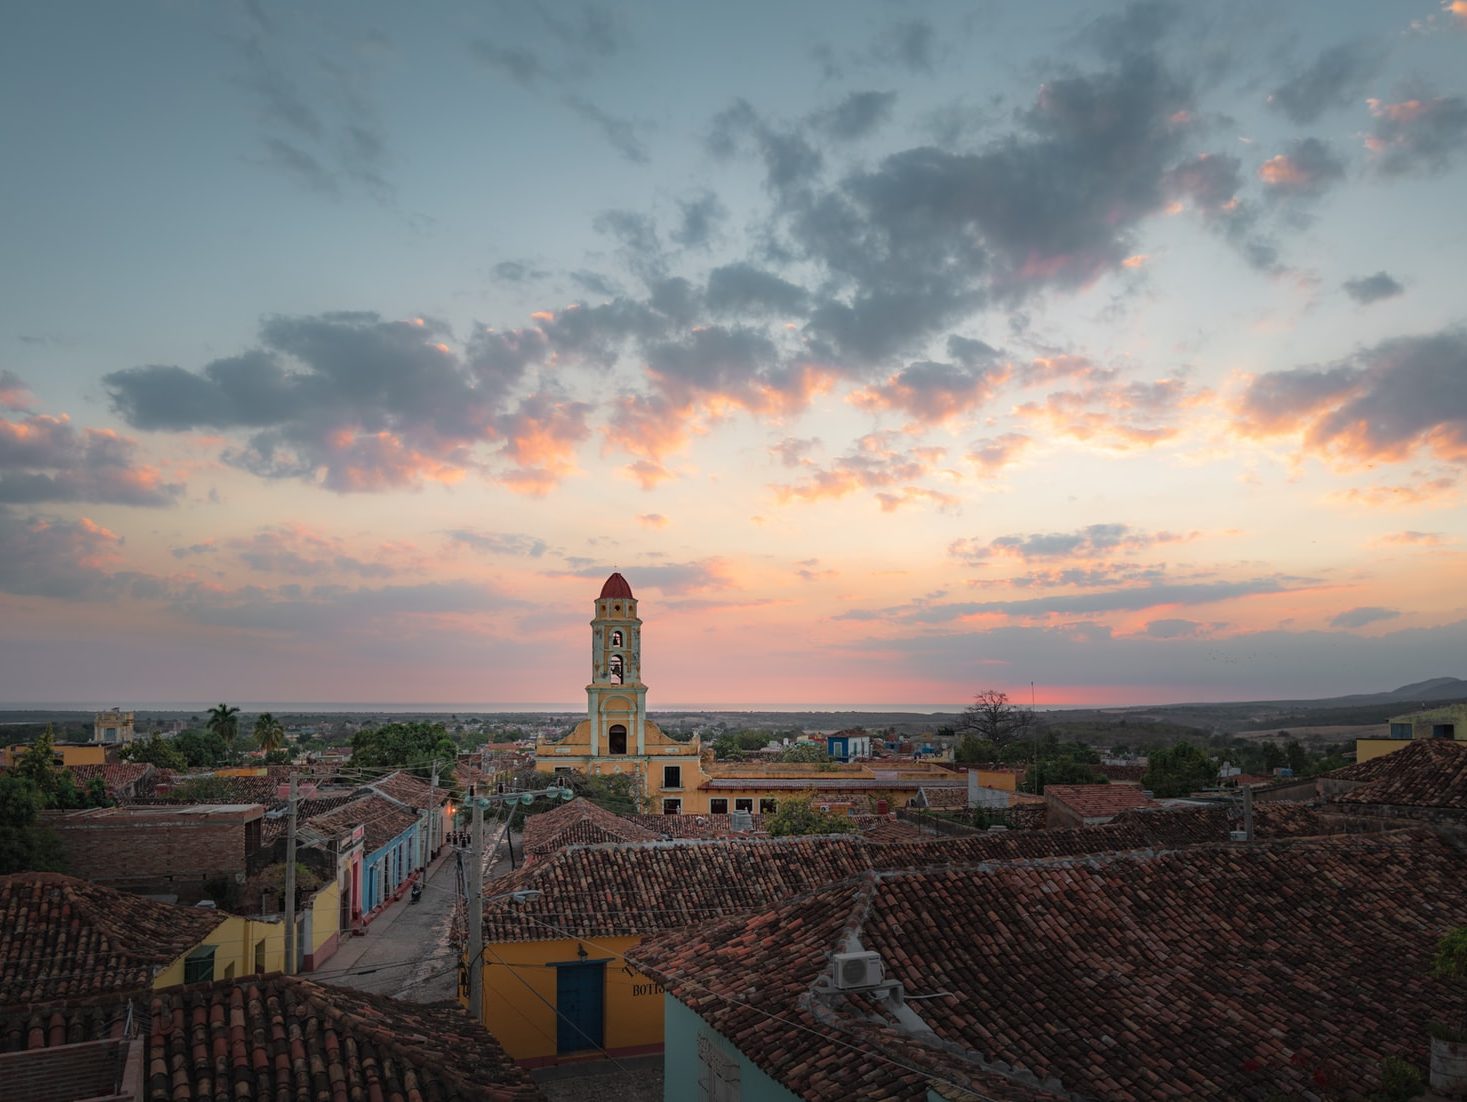 sunset over trinidad in cuba